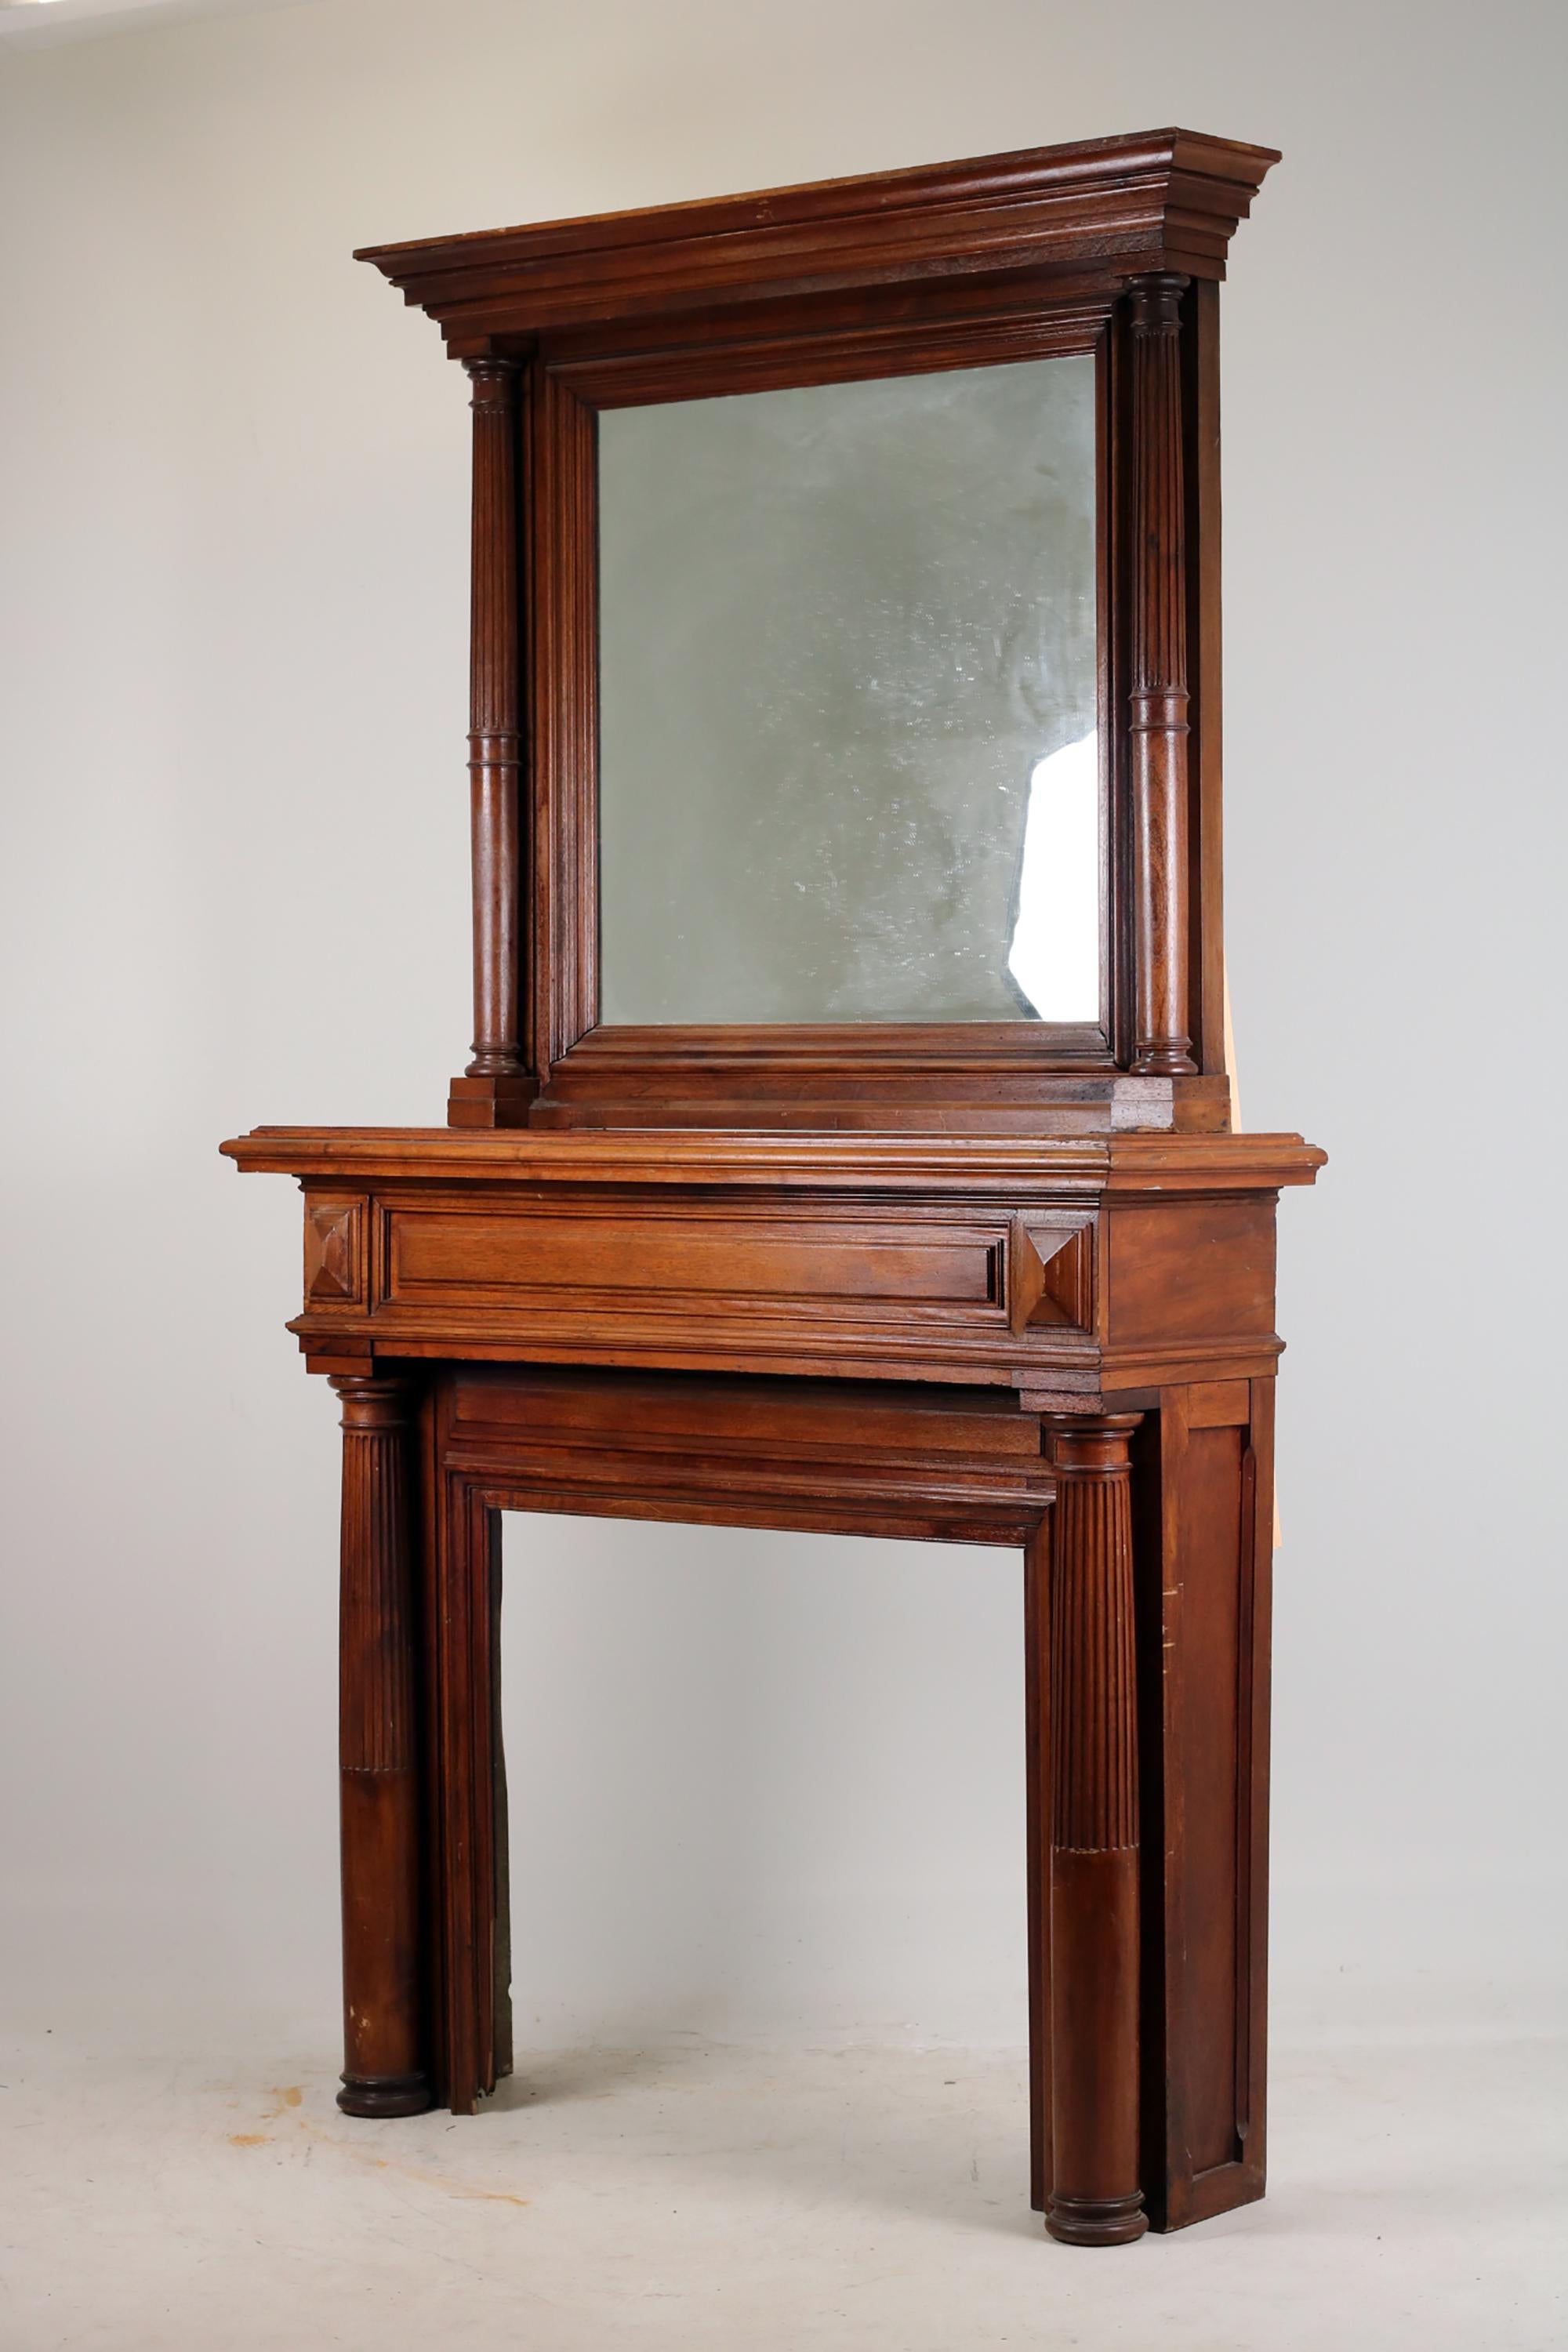 Neoclassical Fireplace, 
Ca.1890-1900
Solid oak

Antique Neoclassical Fireplace Mantel made with solid oak wood with frame with mirror. The fireplace and frame with mirror are two separate elements. 
In the lower and upper part, Doric columns with